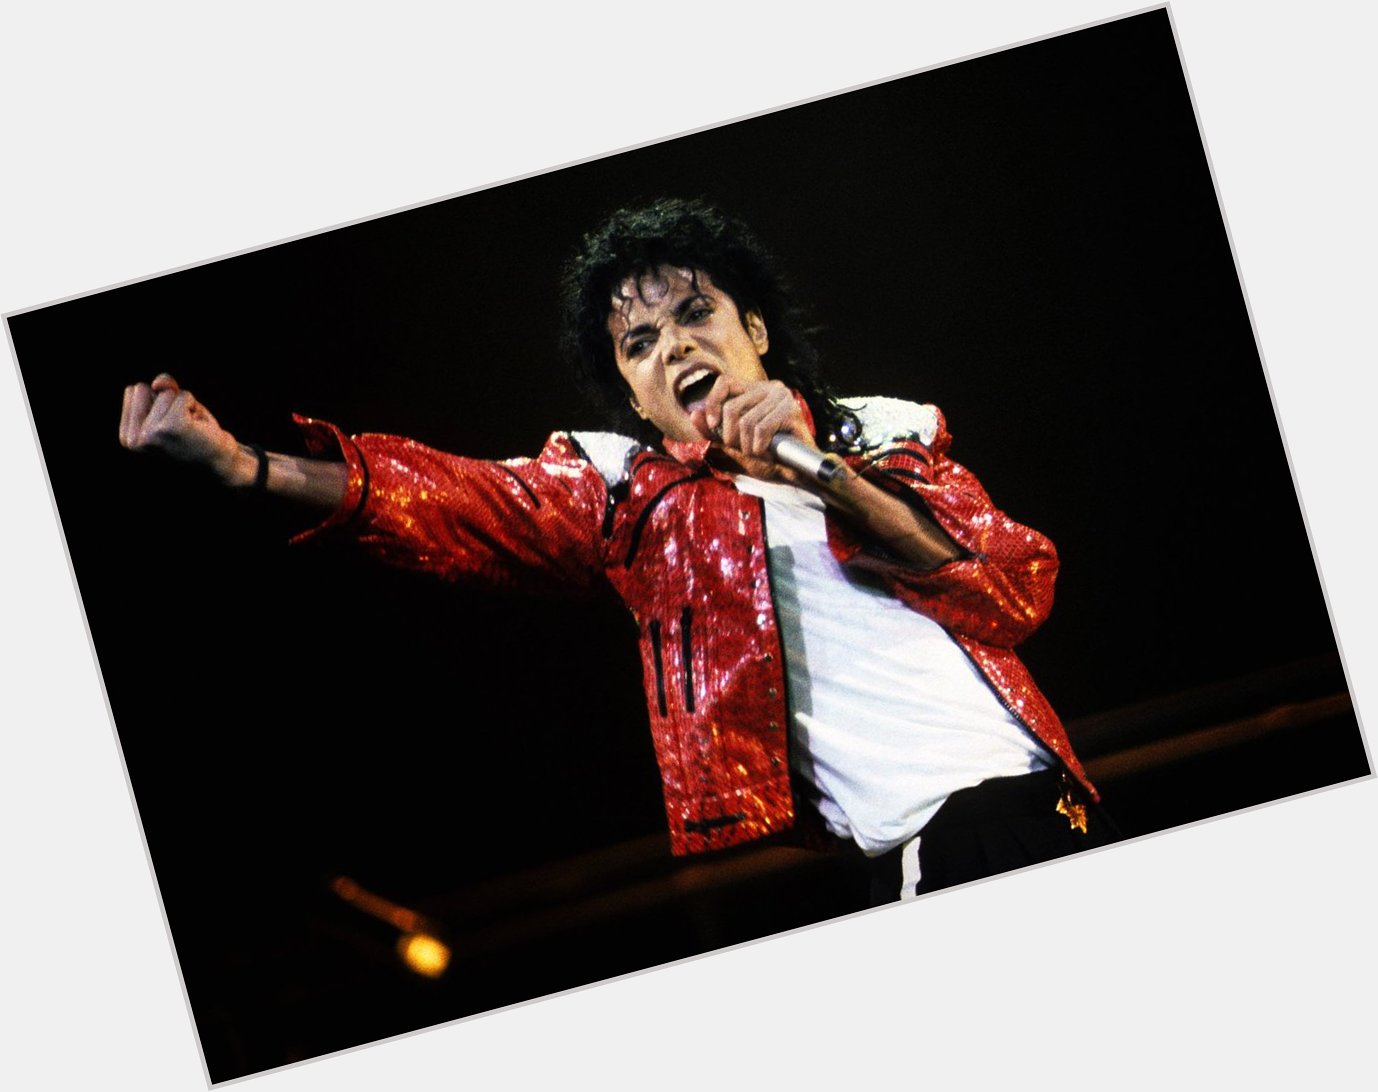 Happy birthday to the \"KING OF POP\" Michael Jackson! (Rest in Paradise) 